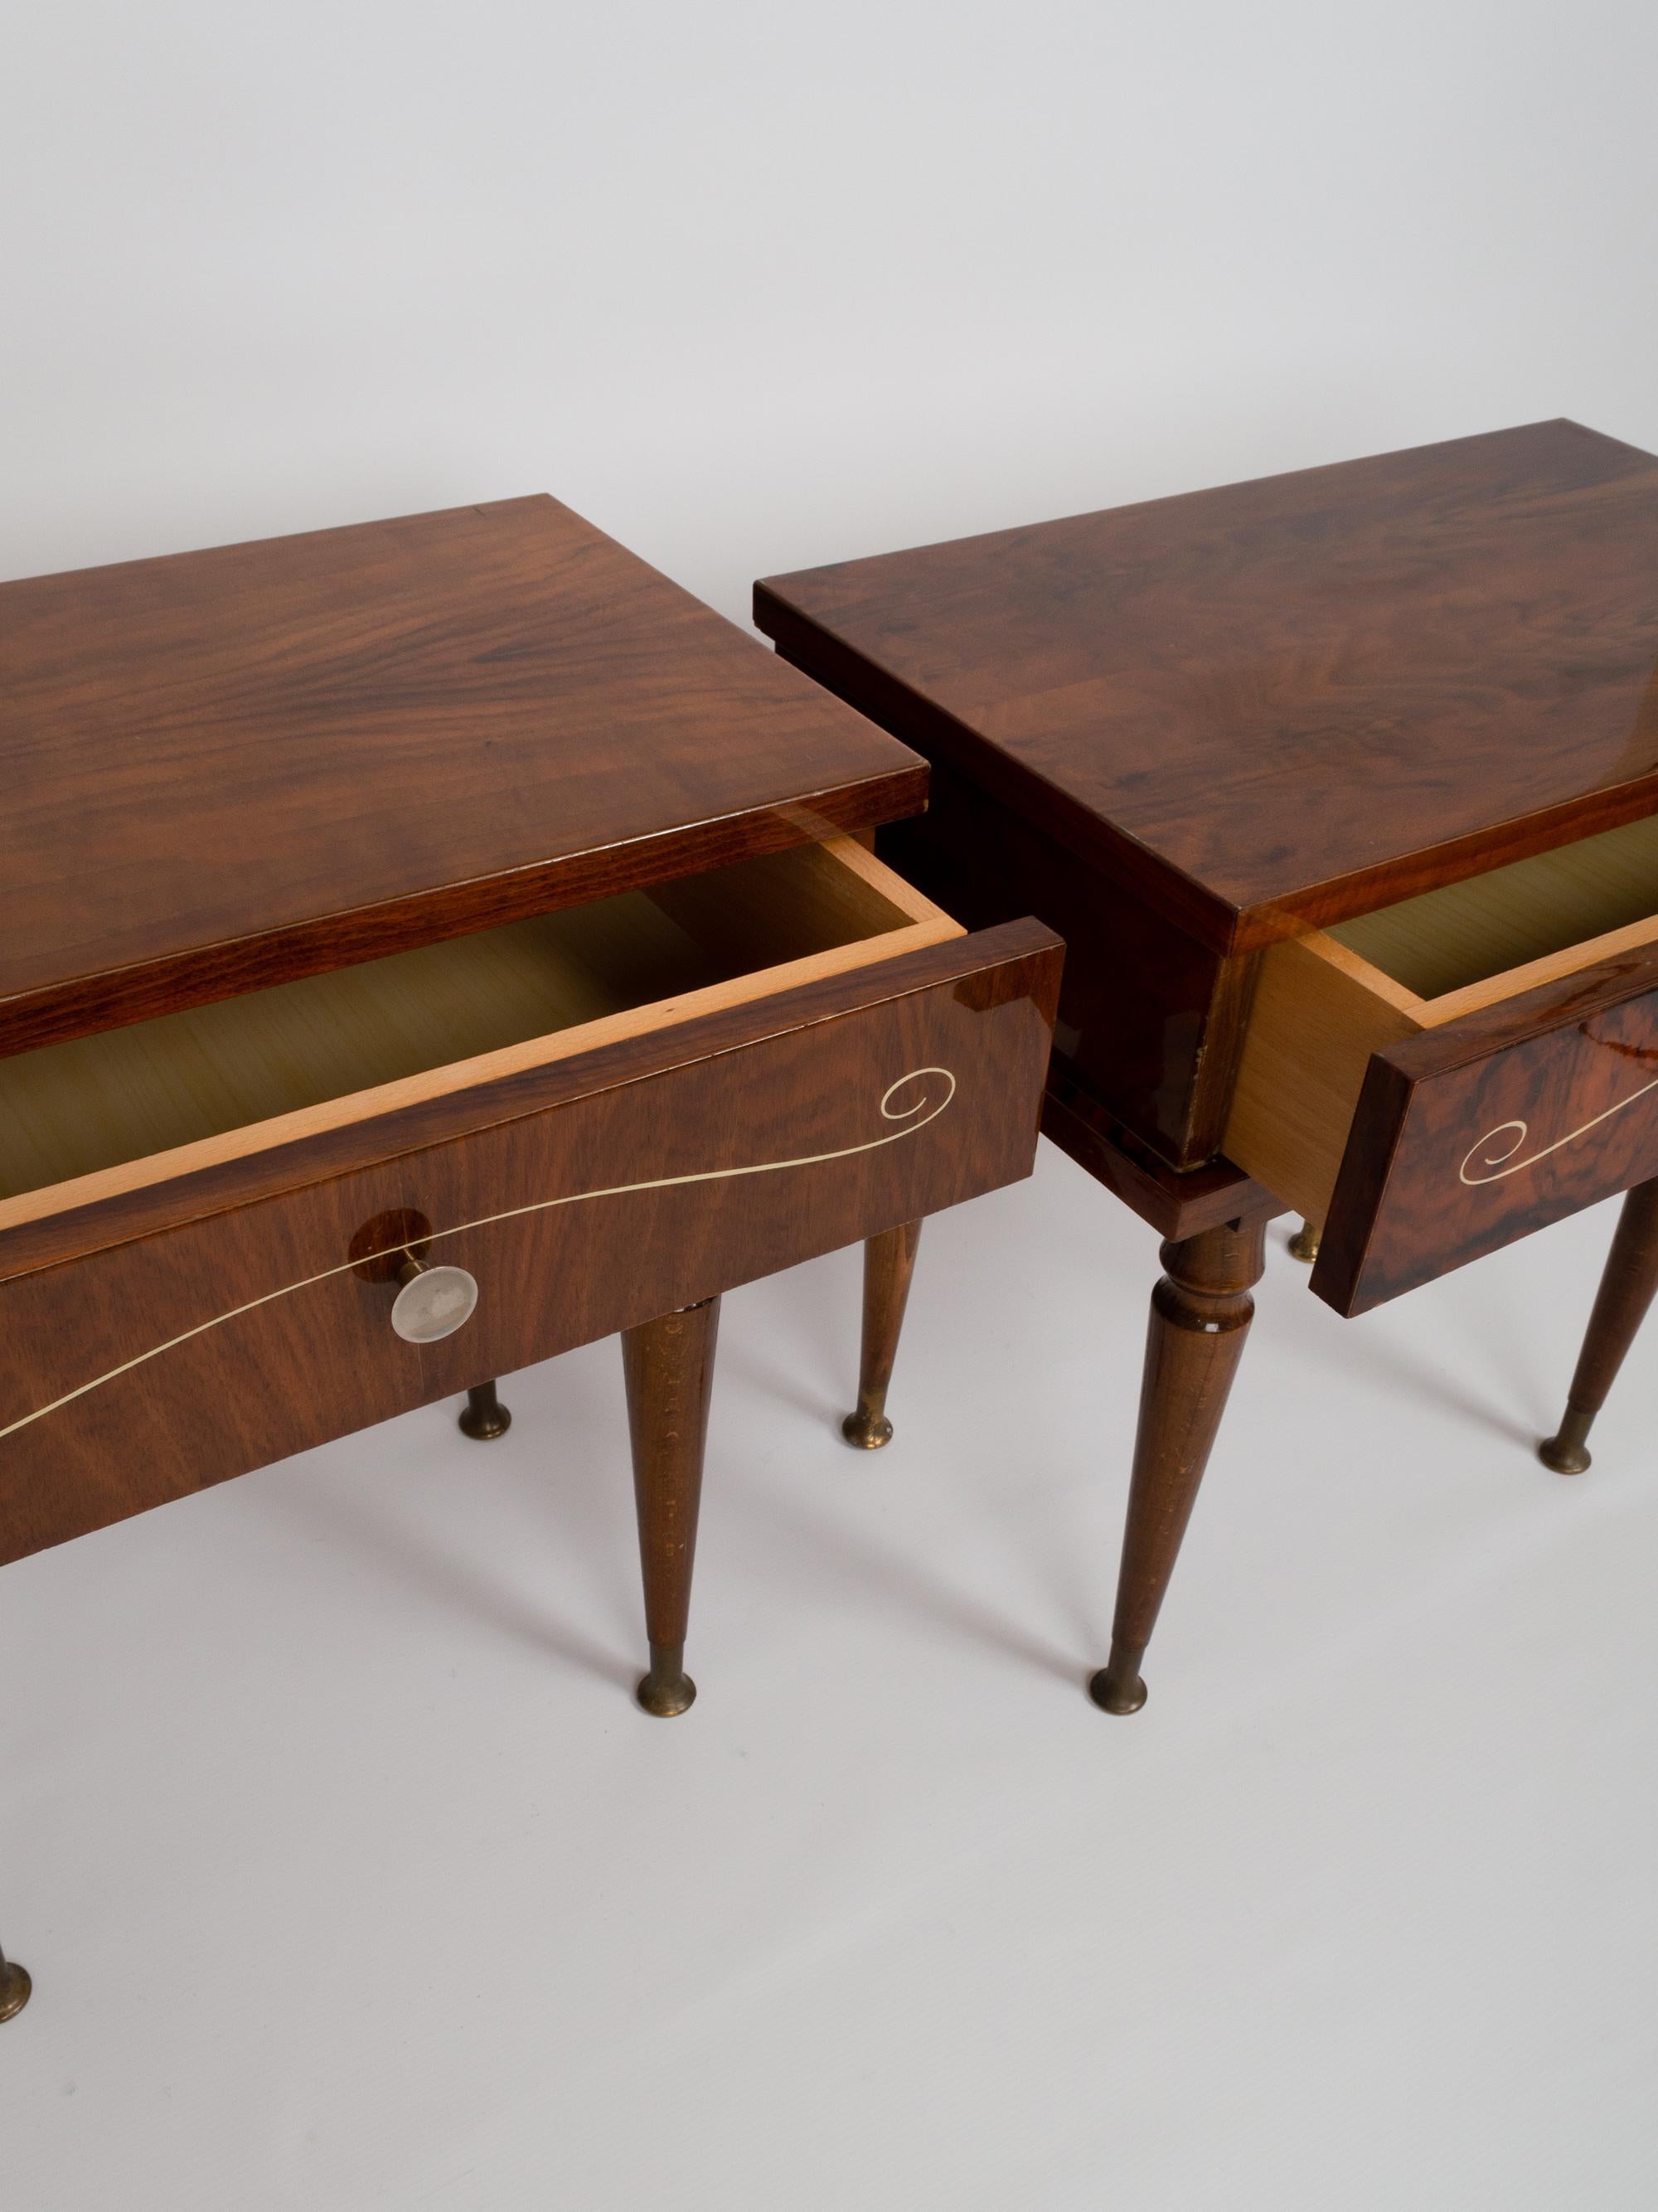 A Harlequin pair of French Art Deco figured walnut nightstands bedside cabinets, circa 1960.

Presented in excellent vintage condition commensurate of age.